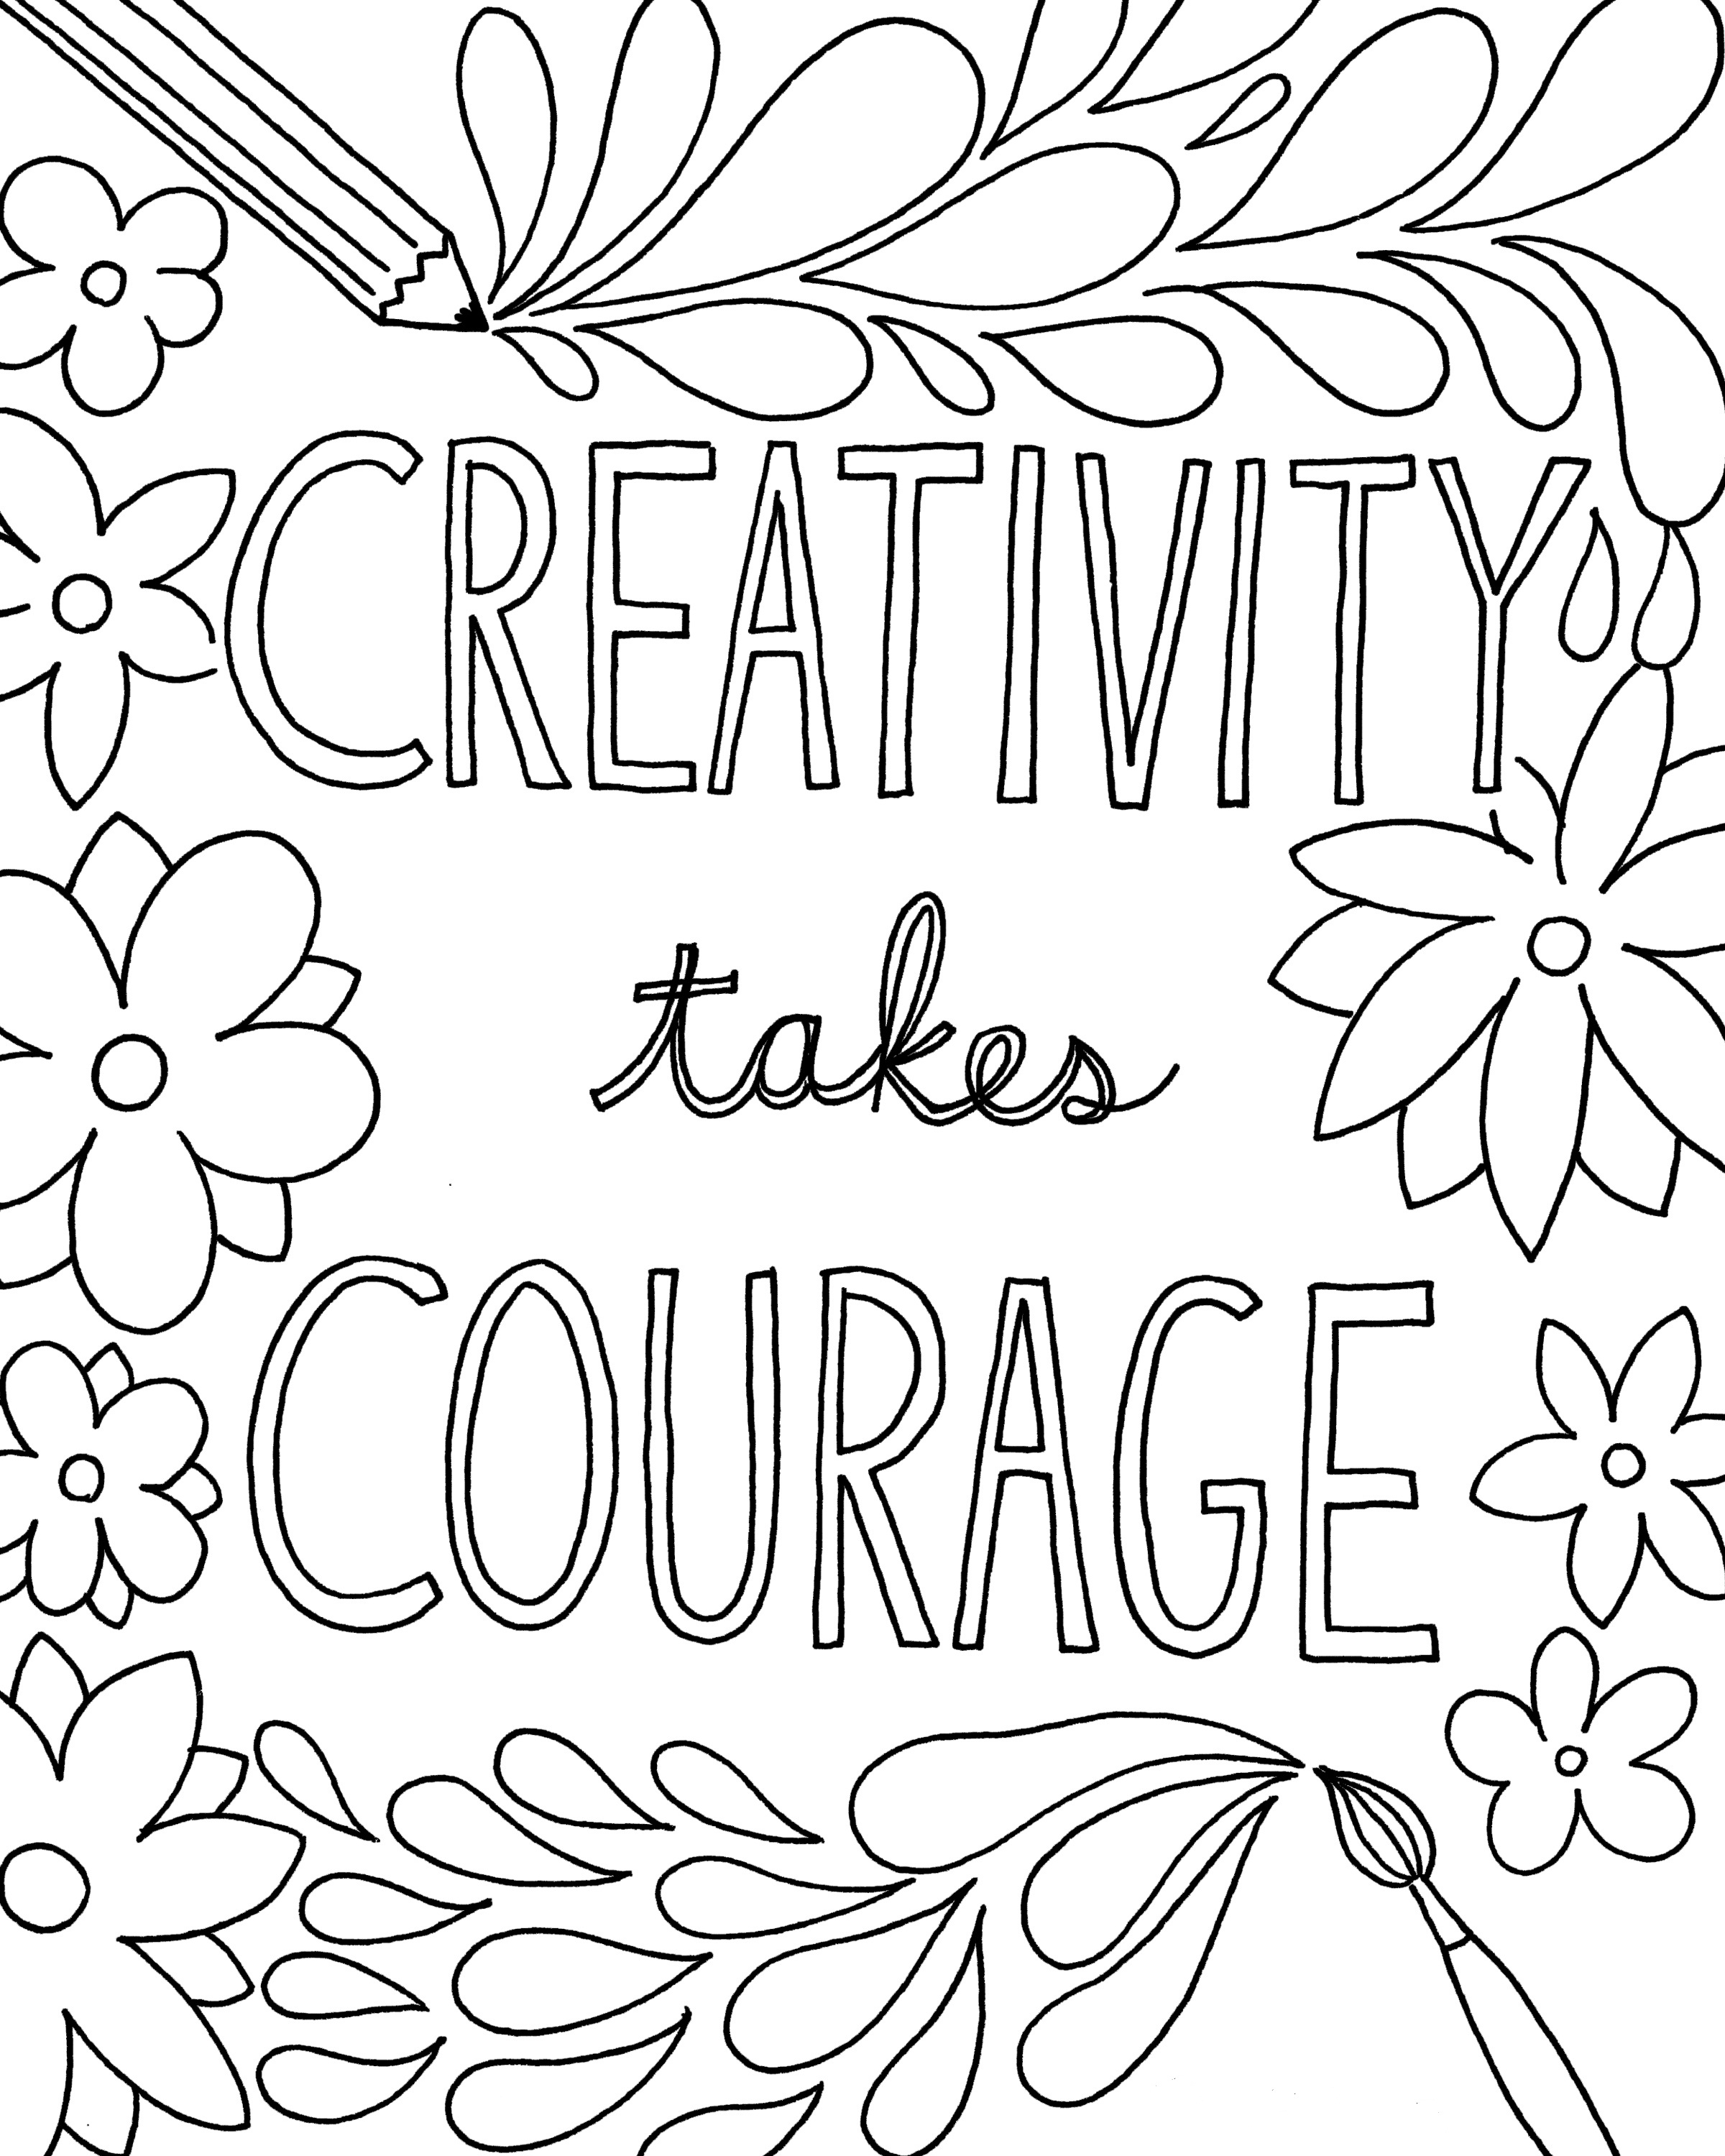 Download Quote and Sayings Coloring Pages | Activity Shelter